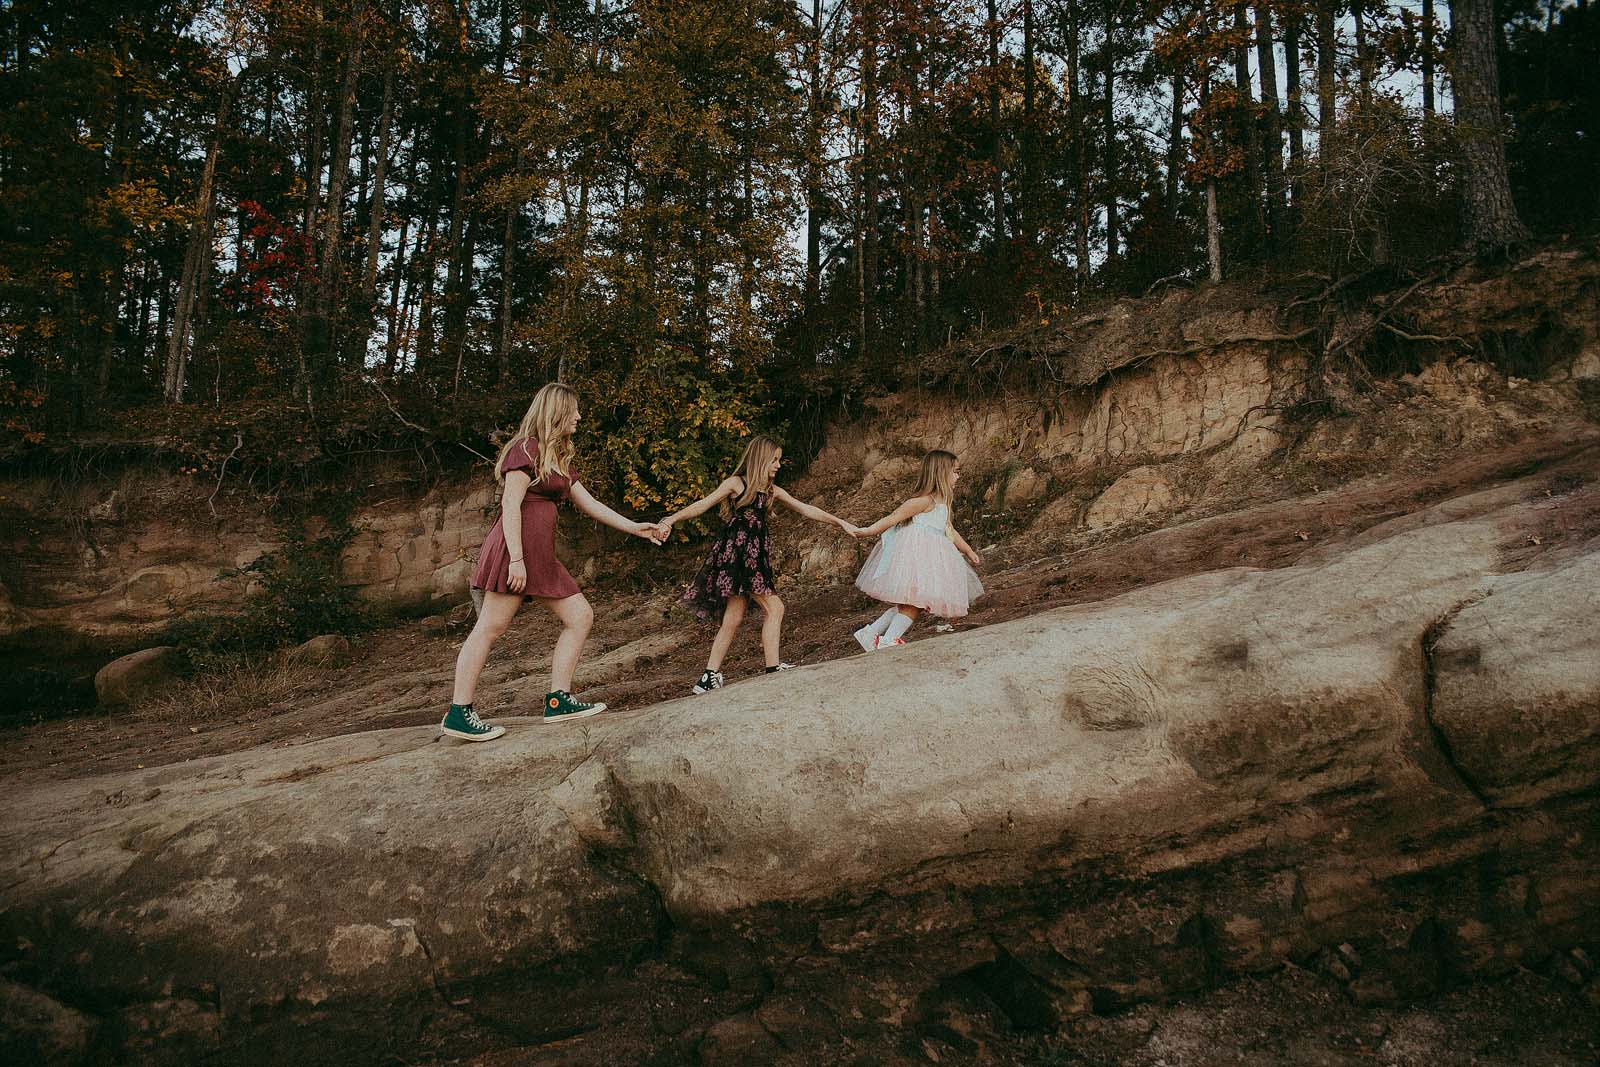 Beanstalk Durham fashion meets the natural beauty of Jordan Lake in this enchanting family portrait, crafted with precision by Victoria Vasilyeva Photography.